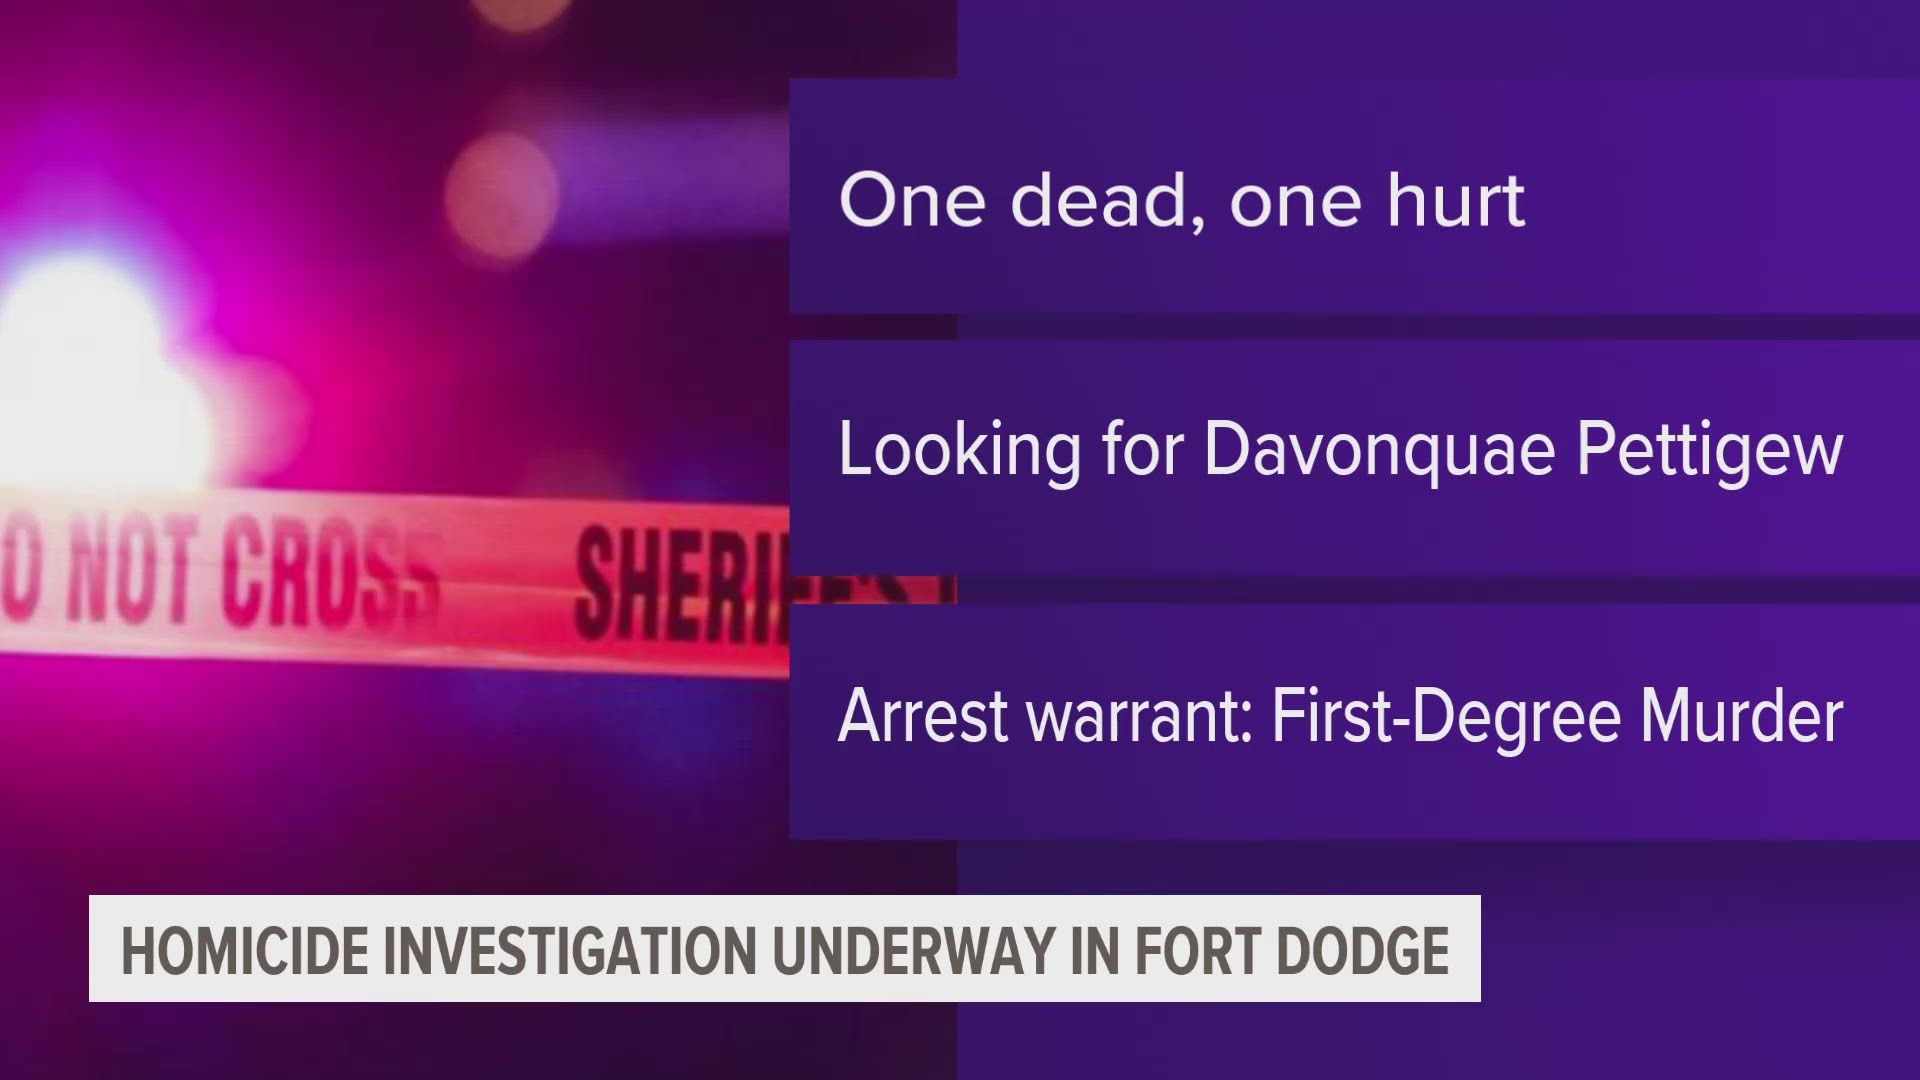 Police issued an arrest warrant for 17-year-old Fort Dodge resident Davonquae Jyshon "D.J." Pettigrew in connection to the investigation.